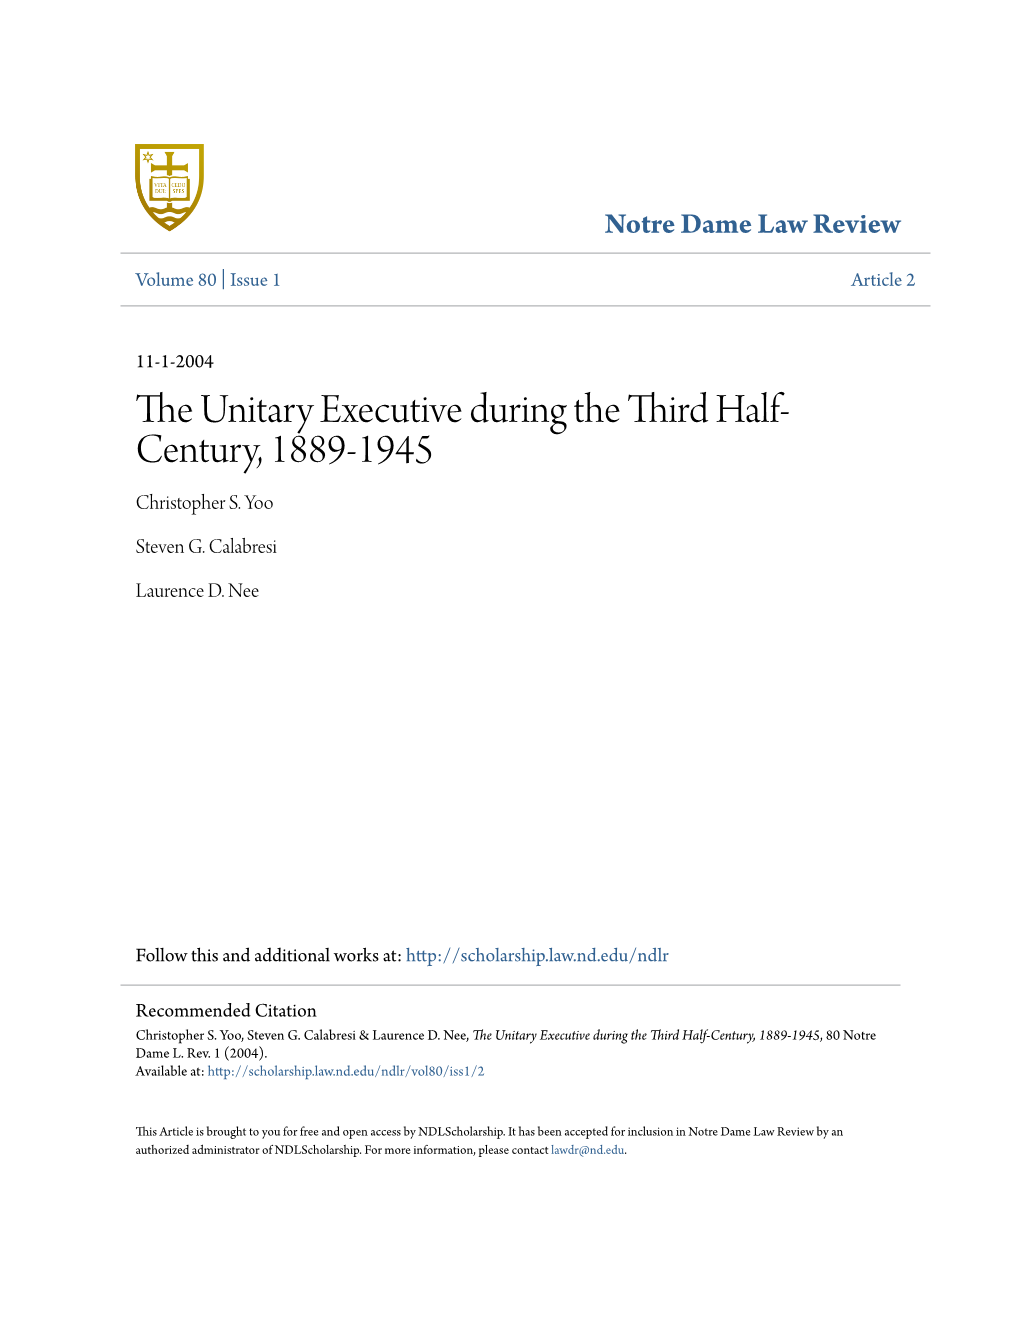 The Unitary Executive During the Third Half-Century, 1889-1945, 80 Notre Dame L